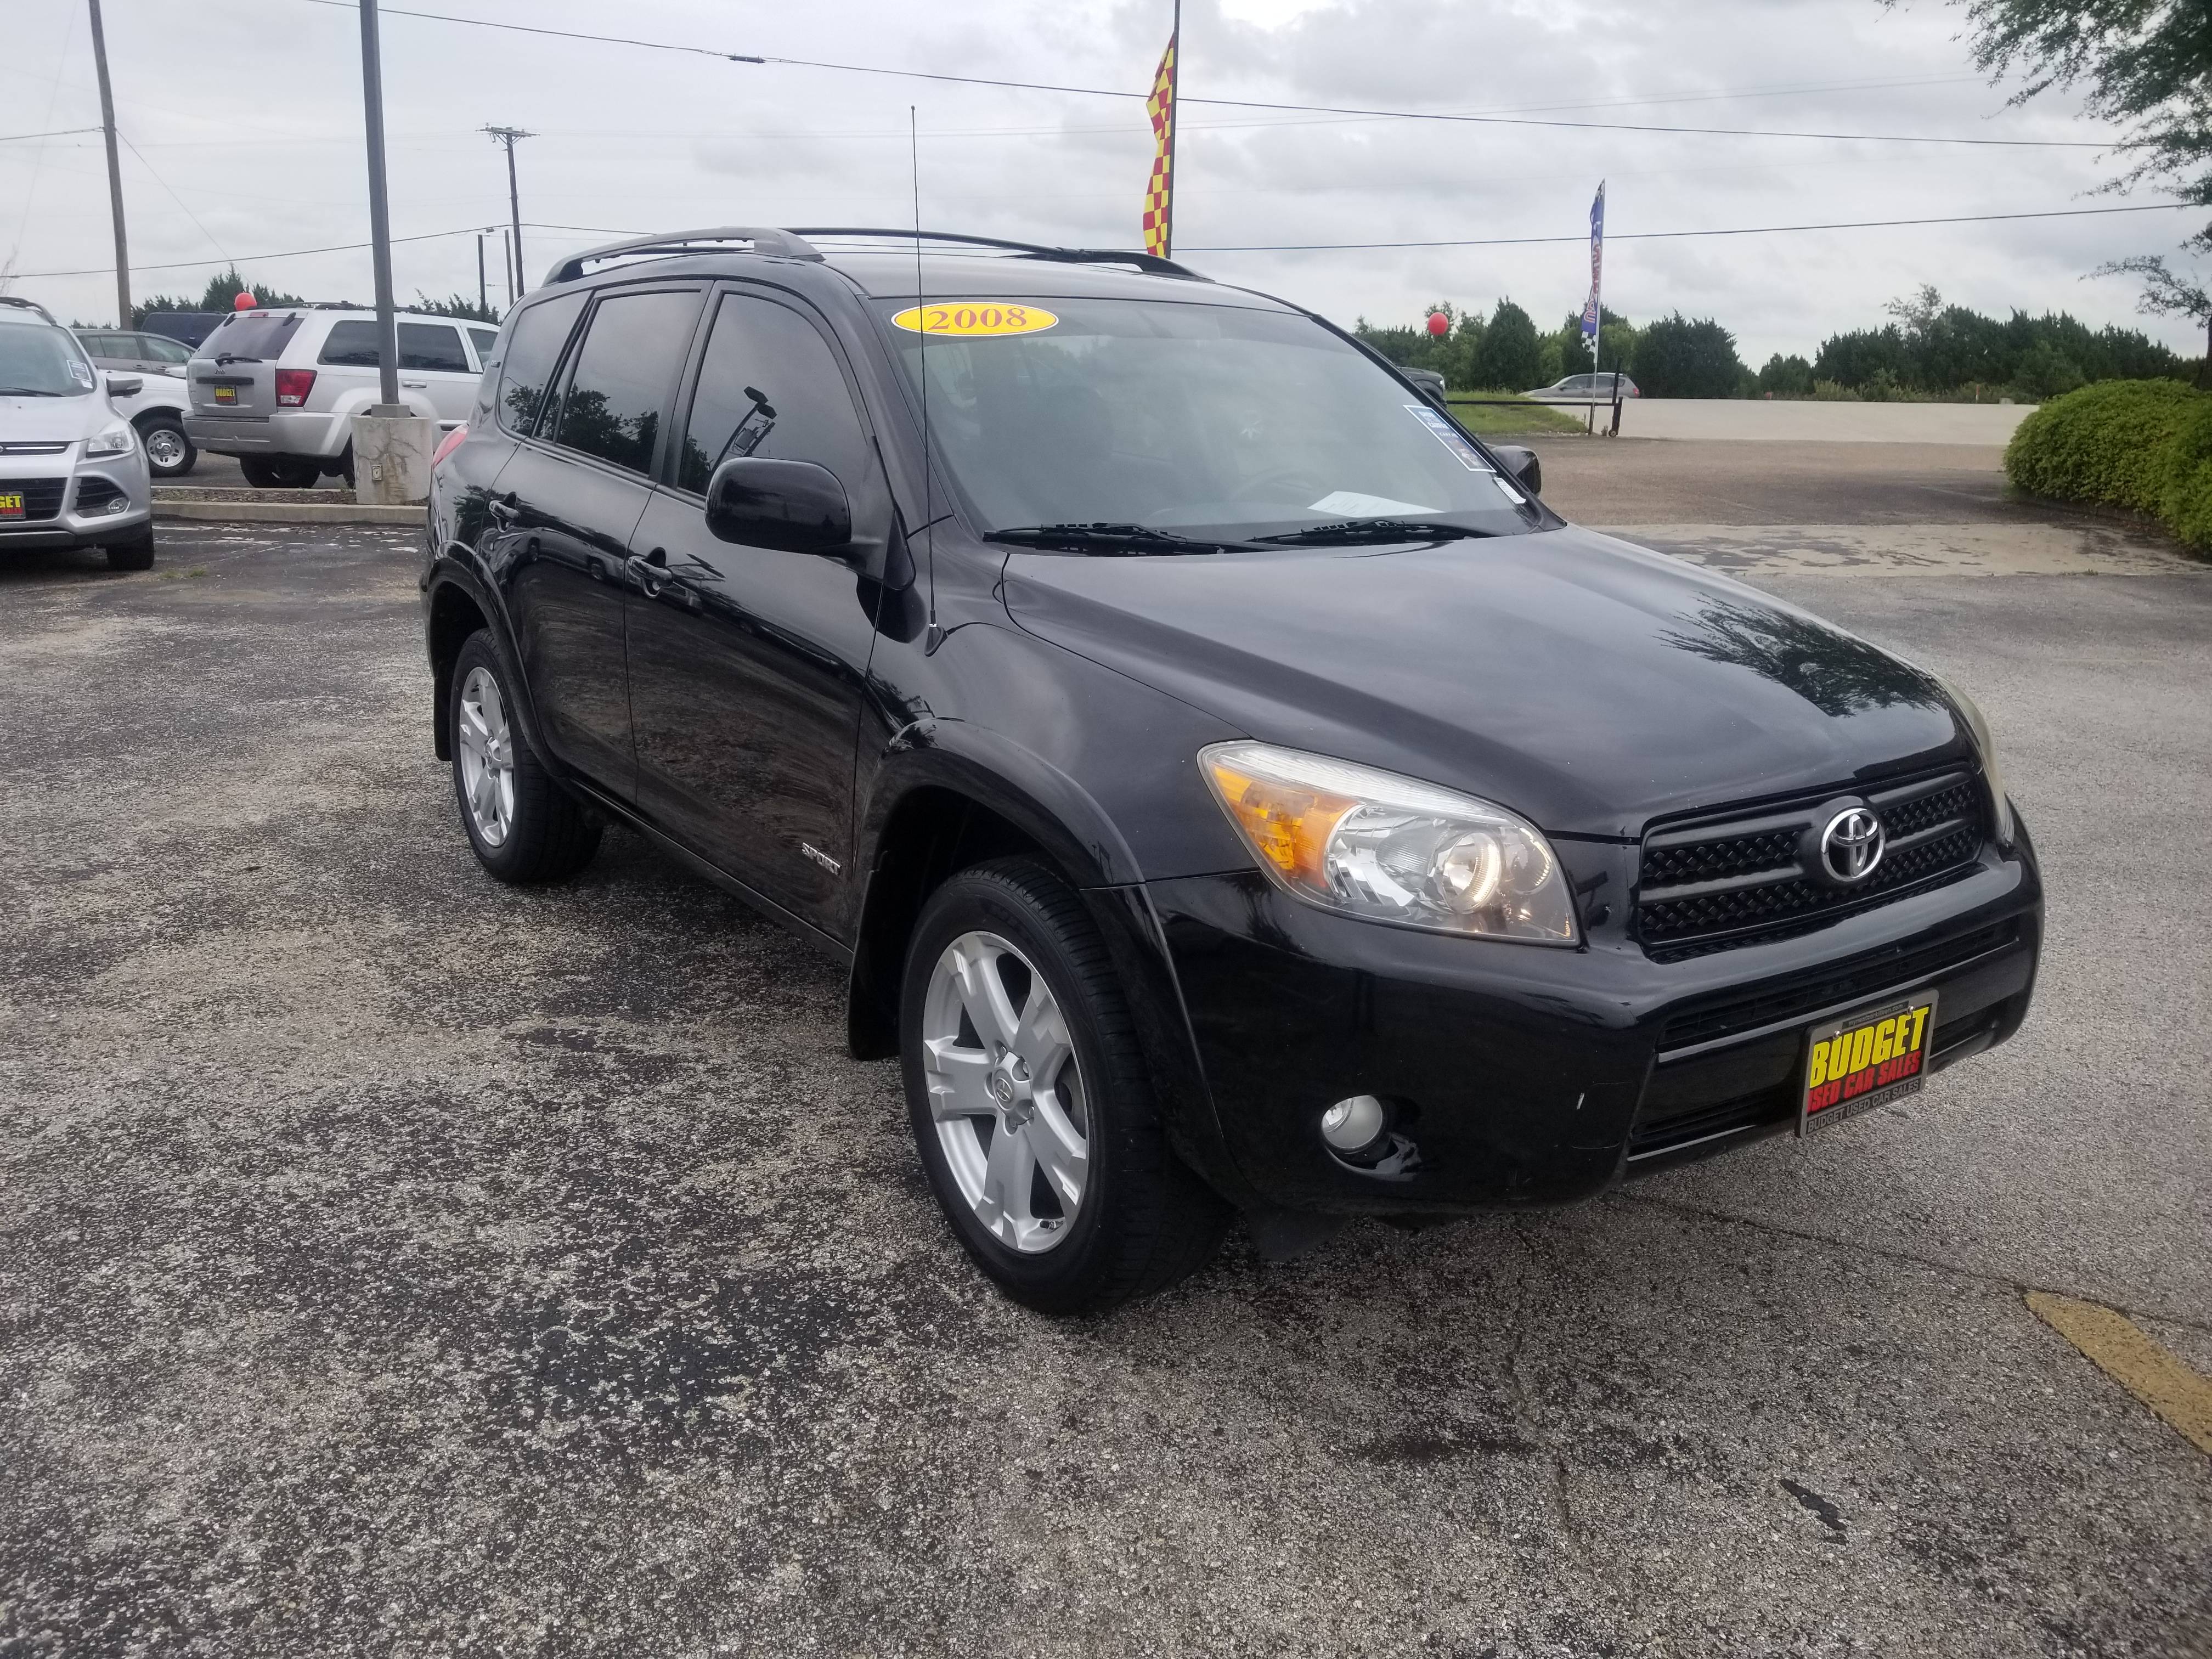 Used 2008 Toyota Rav4 Sport I4 2wd For Sale In Killeen 25006 Budget